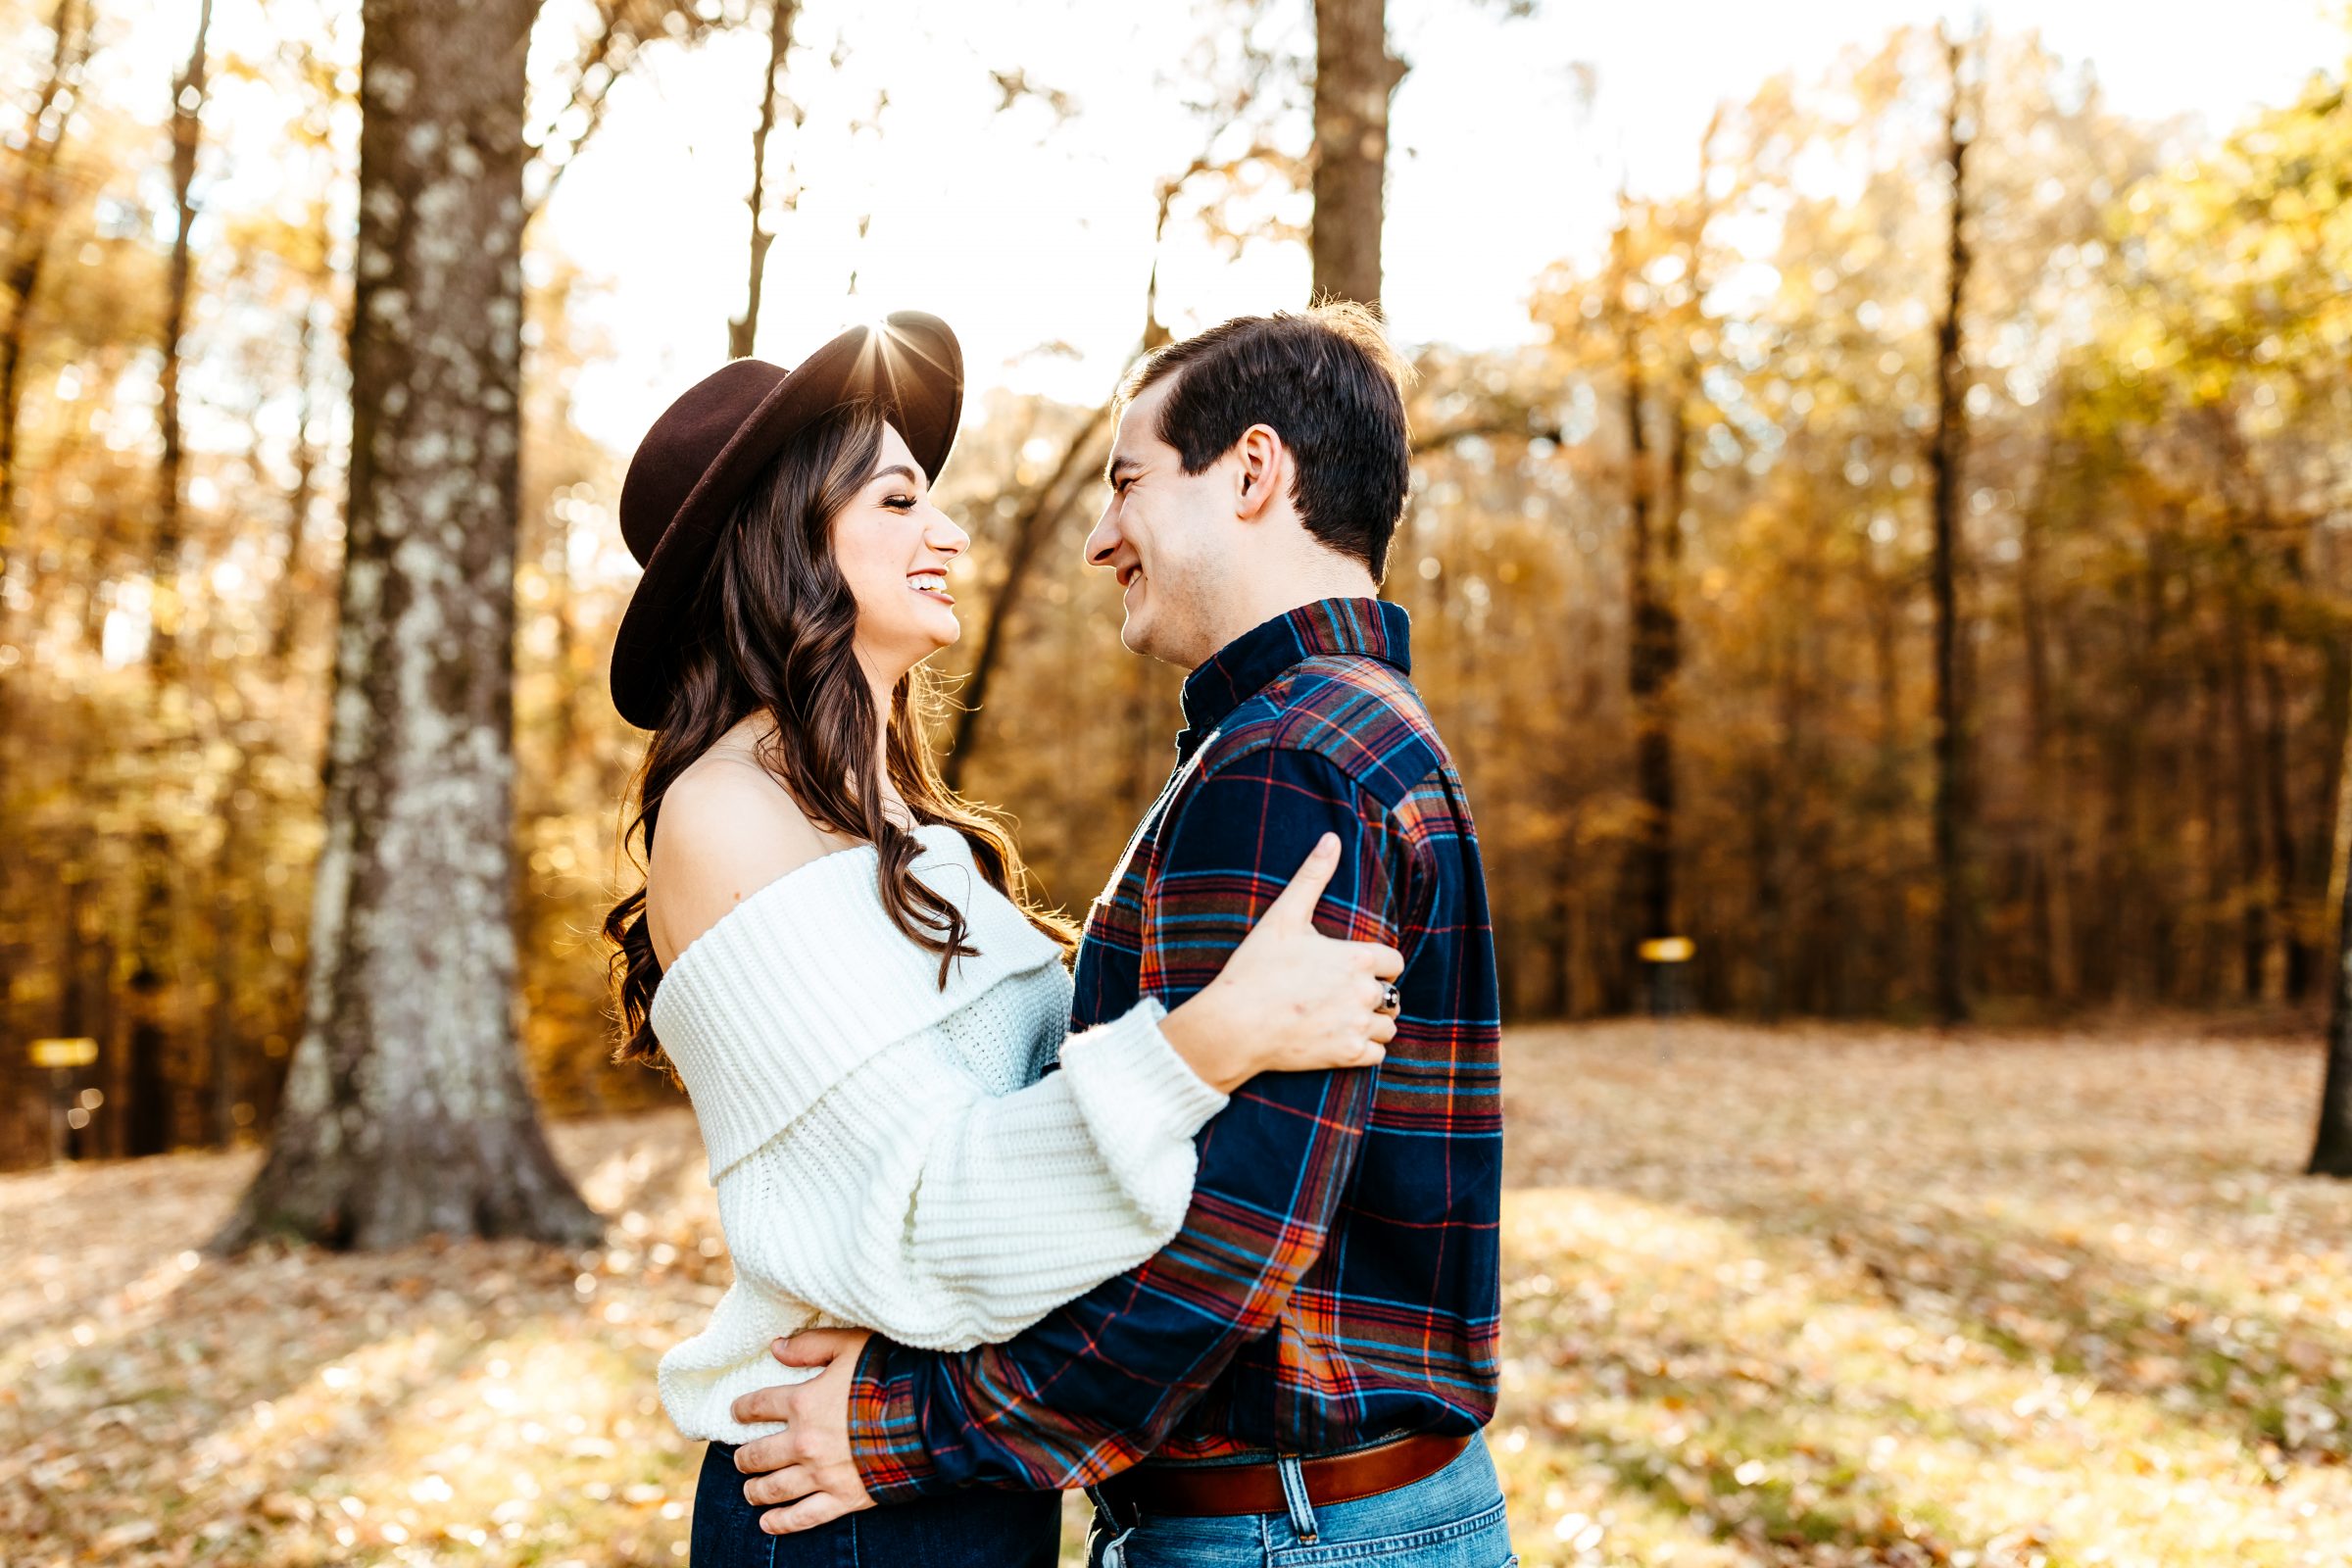 Engaged couple in forest on fall day laughing during sunset